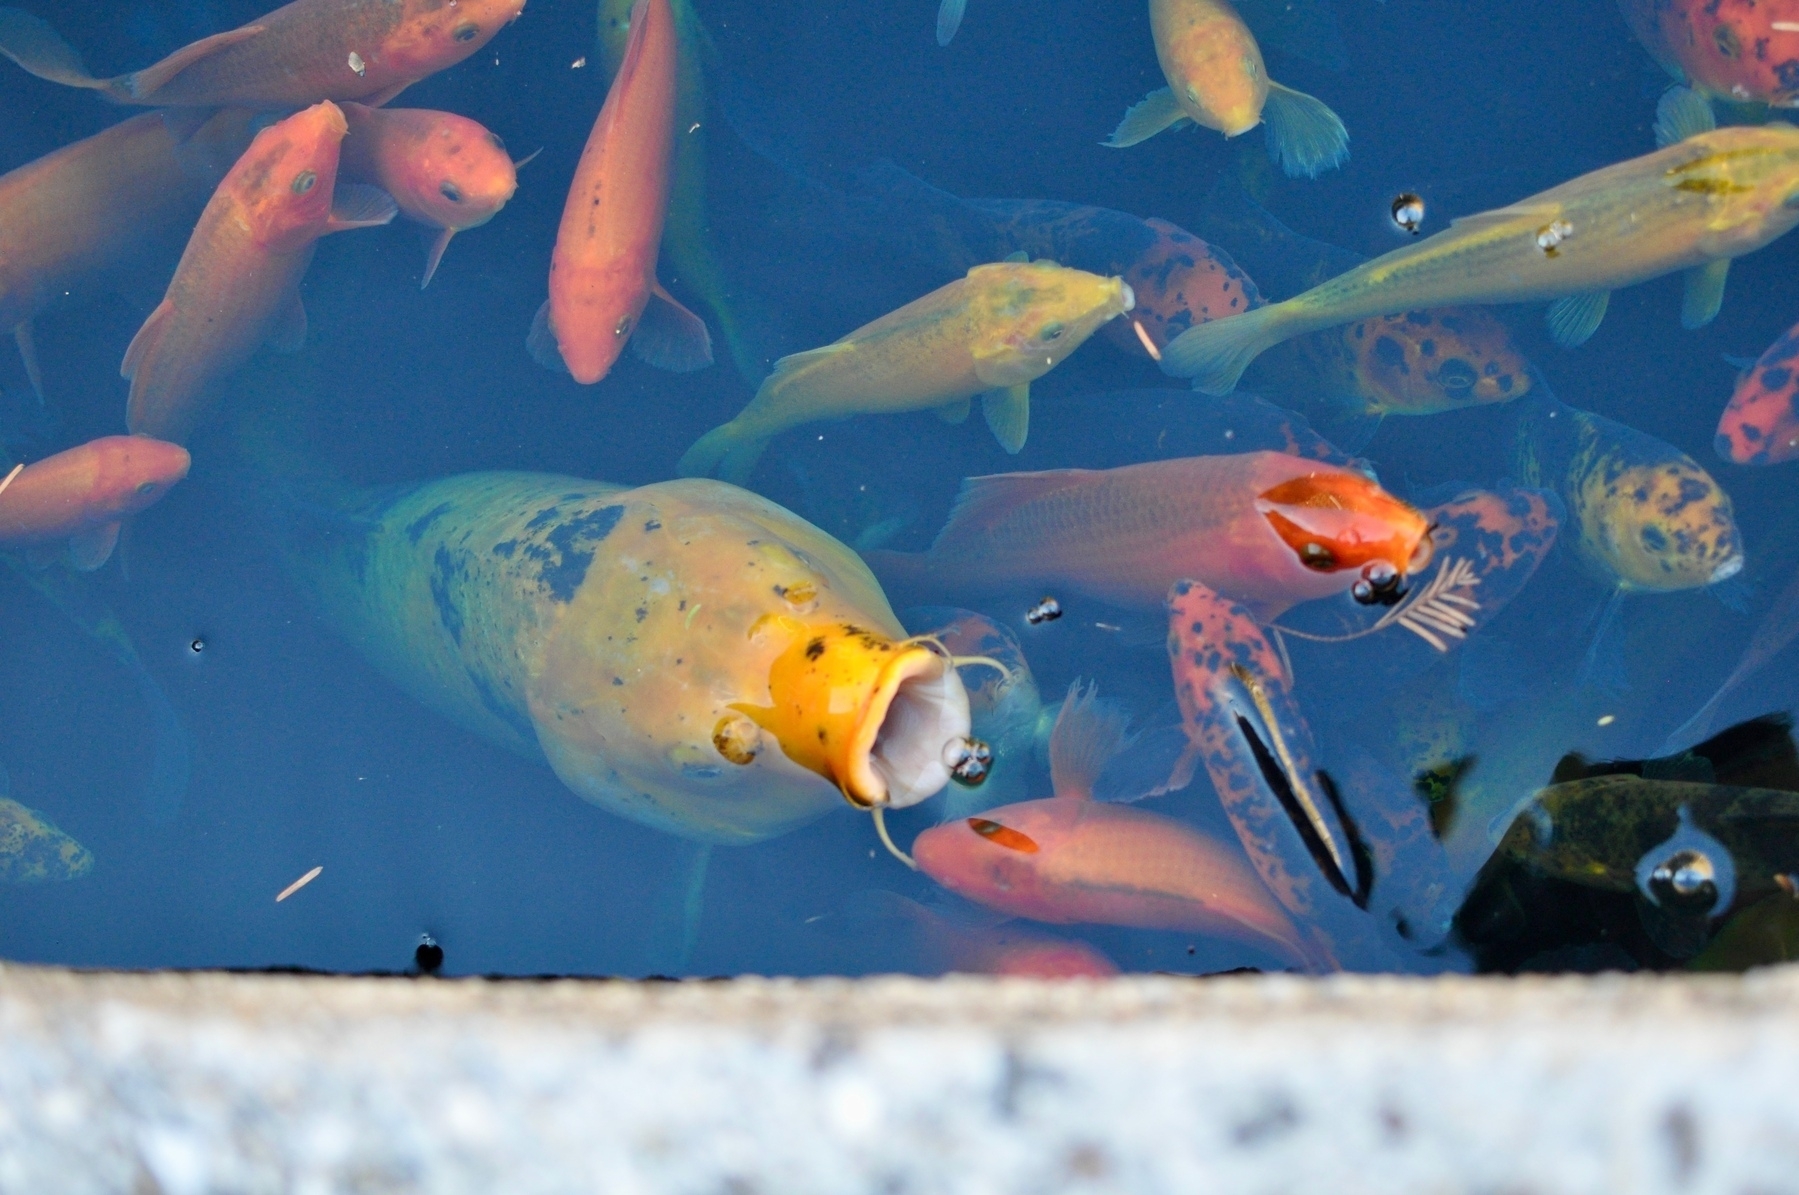 Close-up photo of a koi pond with numerous carps of all sizes looking up. The largest fish has its mouth open and sticking out of the water.